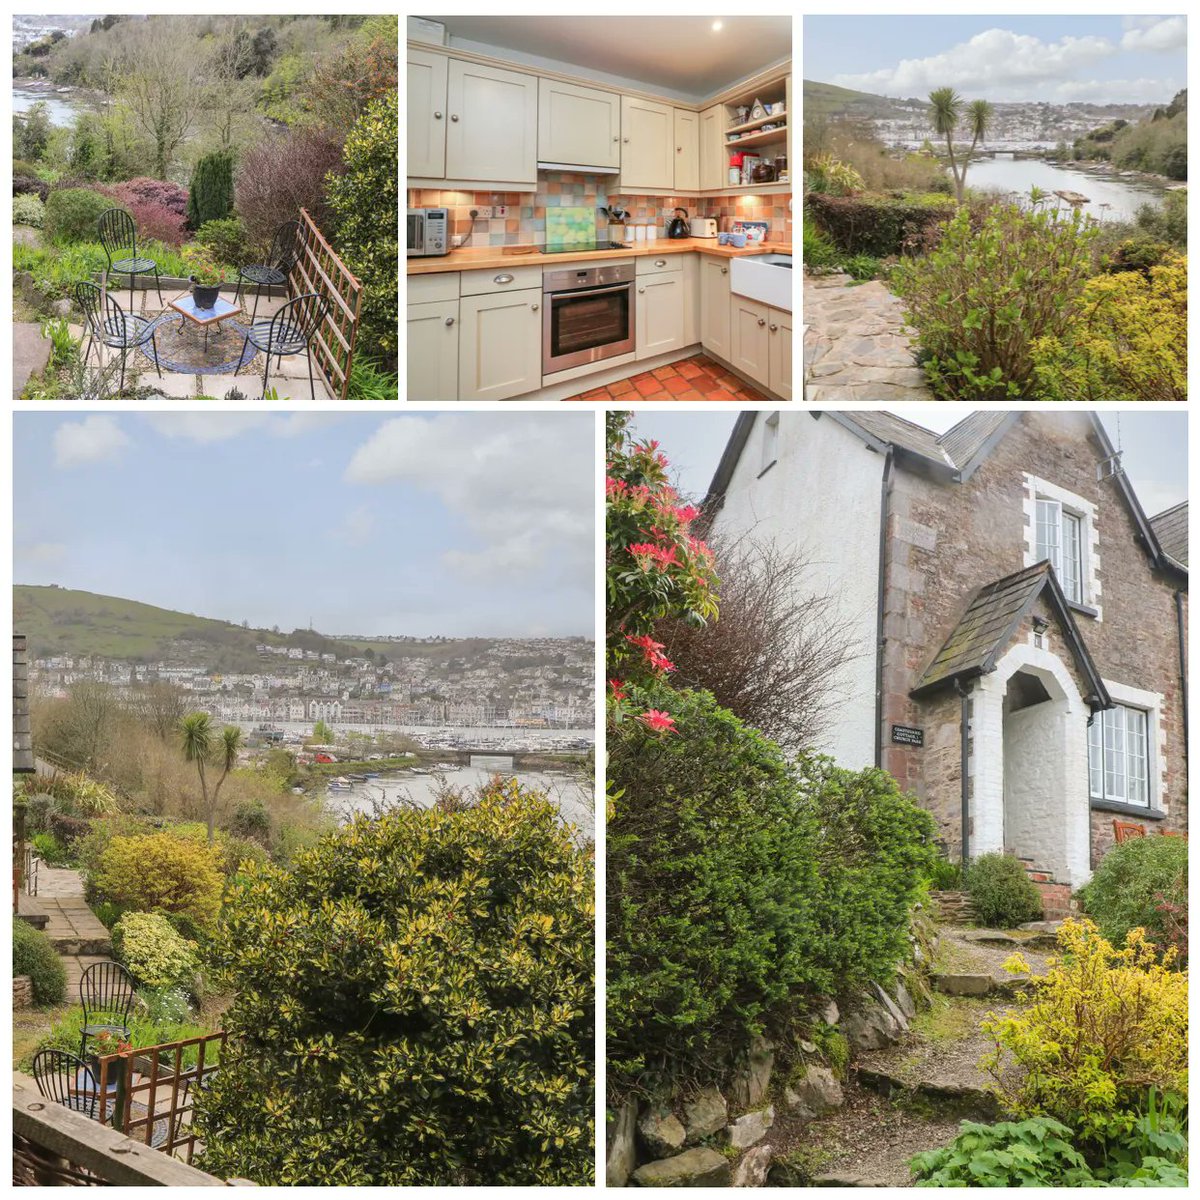 🎉 New property | 🏡 Coastguard Cottage | 📍 Kingswear 🛏 Sleeps 5 🐾 Pet-friendly 🌸 Gardens 🚗 Off-road parking 🔥 Woodburning stove Coastguard Cottage is a Grade II listed property in picturesque Kingswear, just across the river from Dartmouth. bit.ly/CoastguardCott…